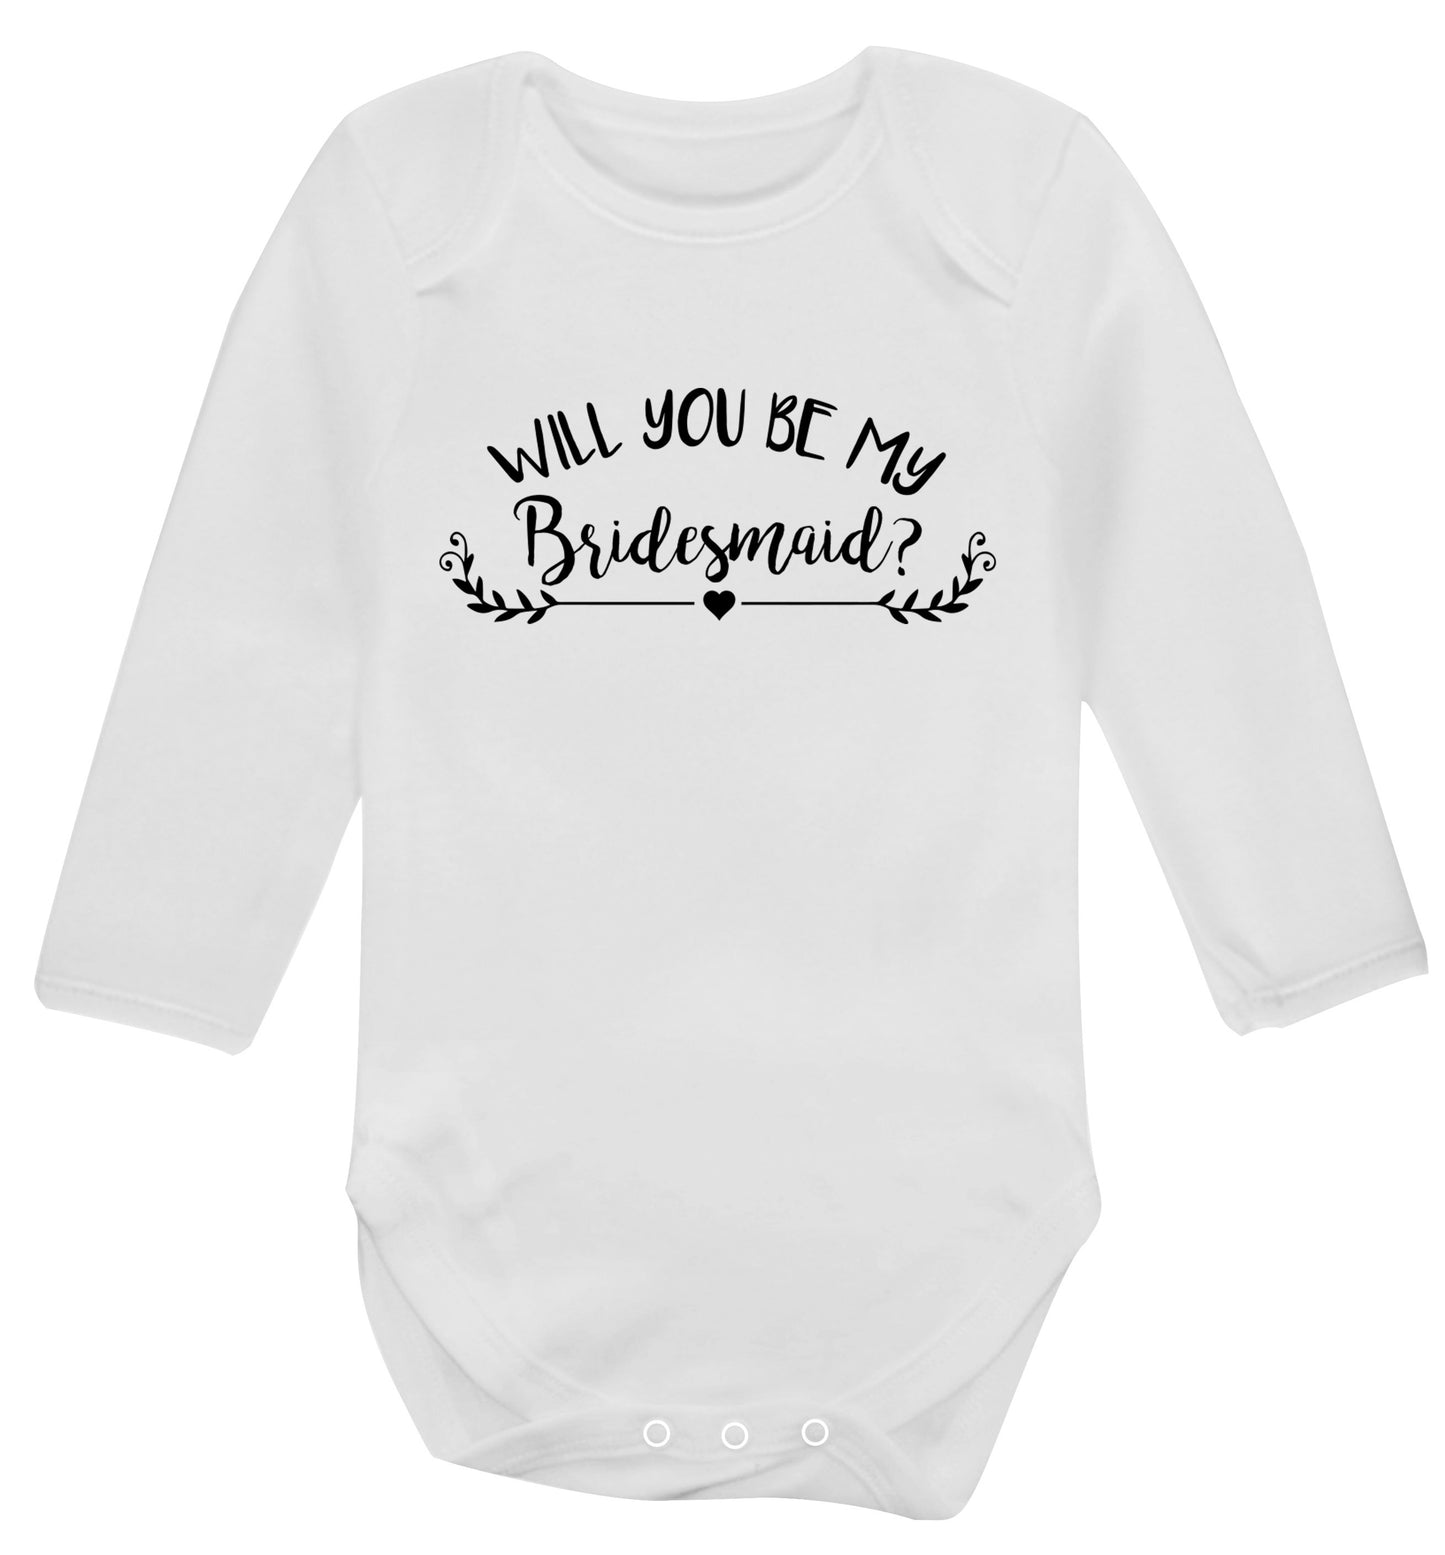 Will you be my bridesmaid? Baby Vest long sleeved white 6-12 months